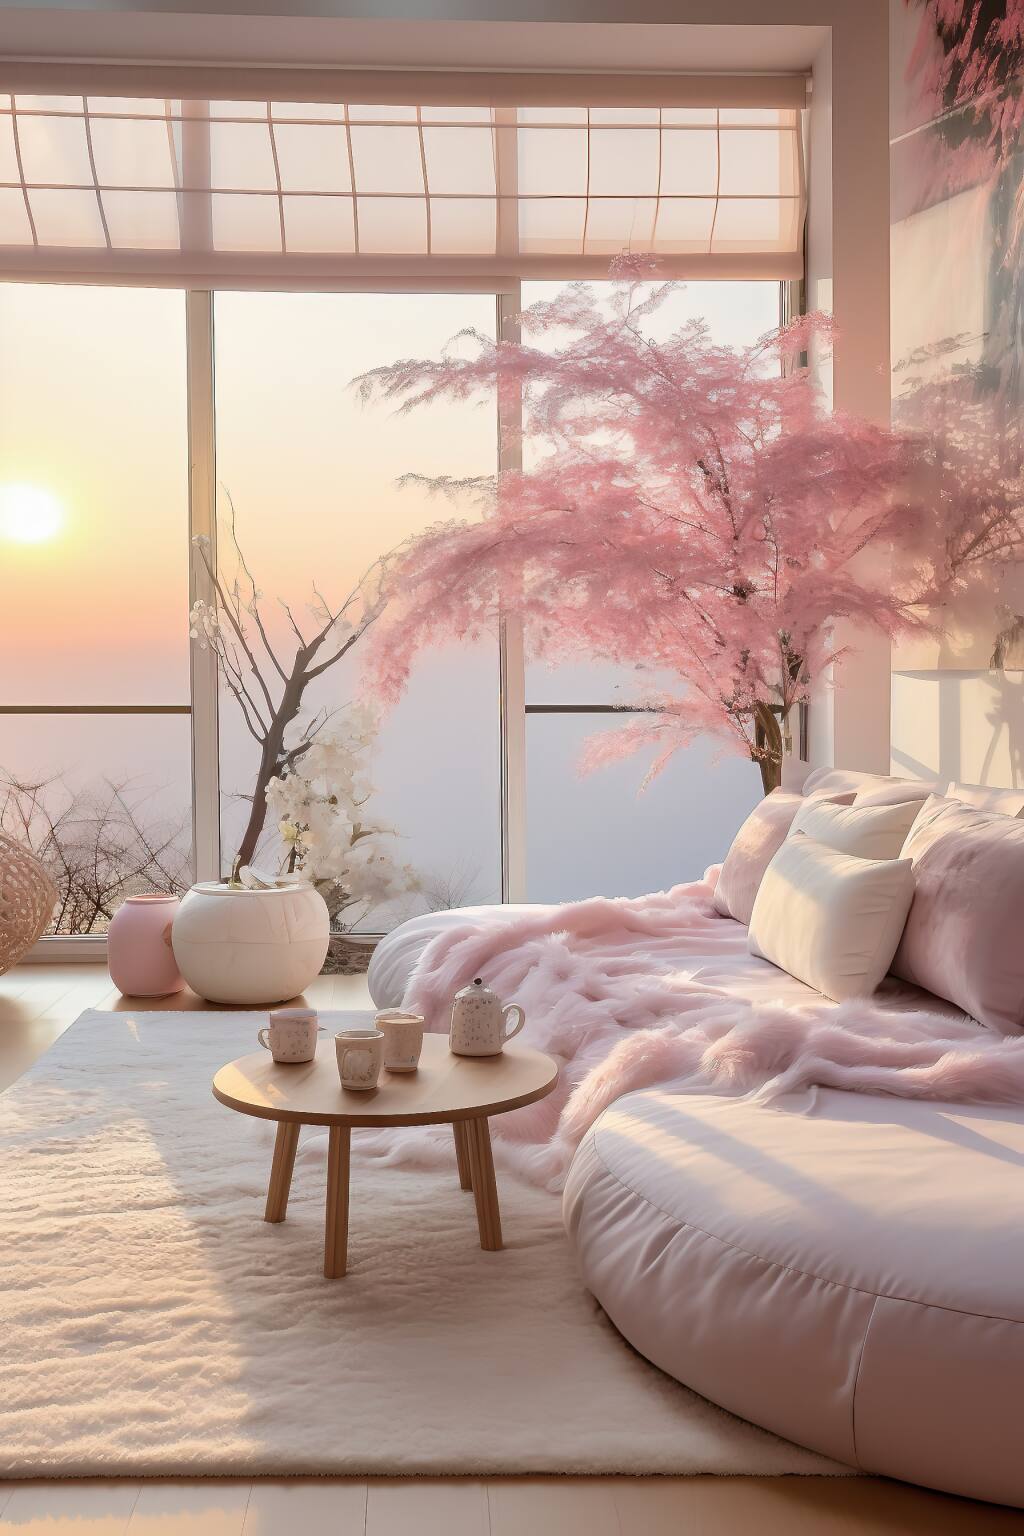 A Cozy Romantic Living Room At Sunset With Pink Lounge Seating, Cherry Blossoms, And A Soft Ivory Rug, Embodying A Romantic Zen Feel.